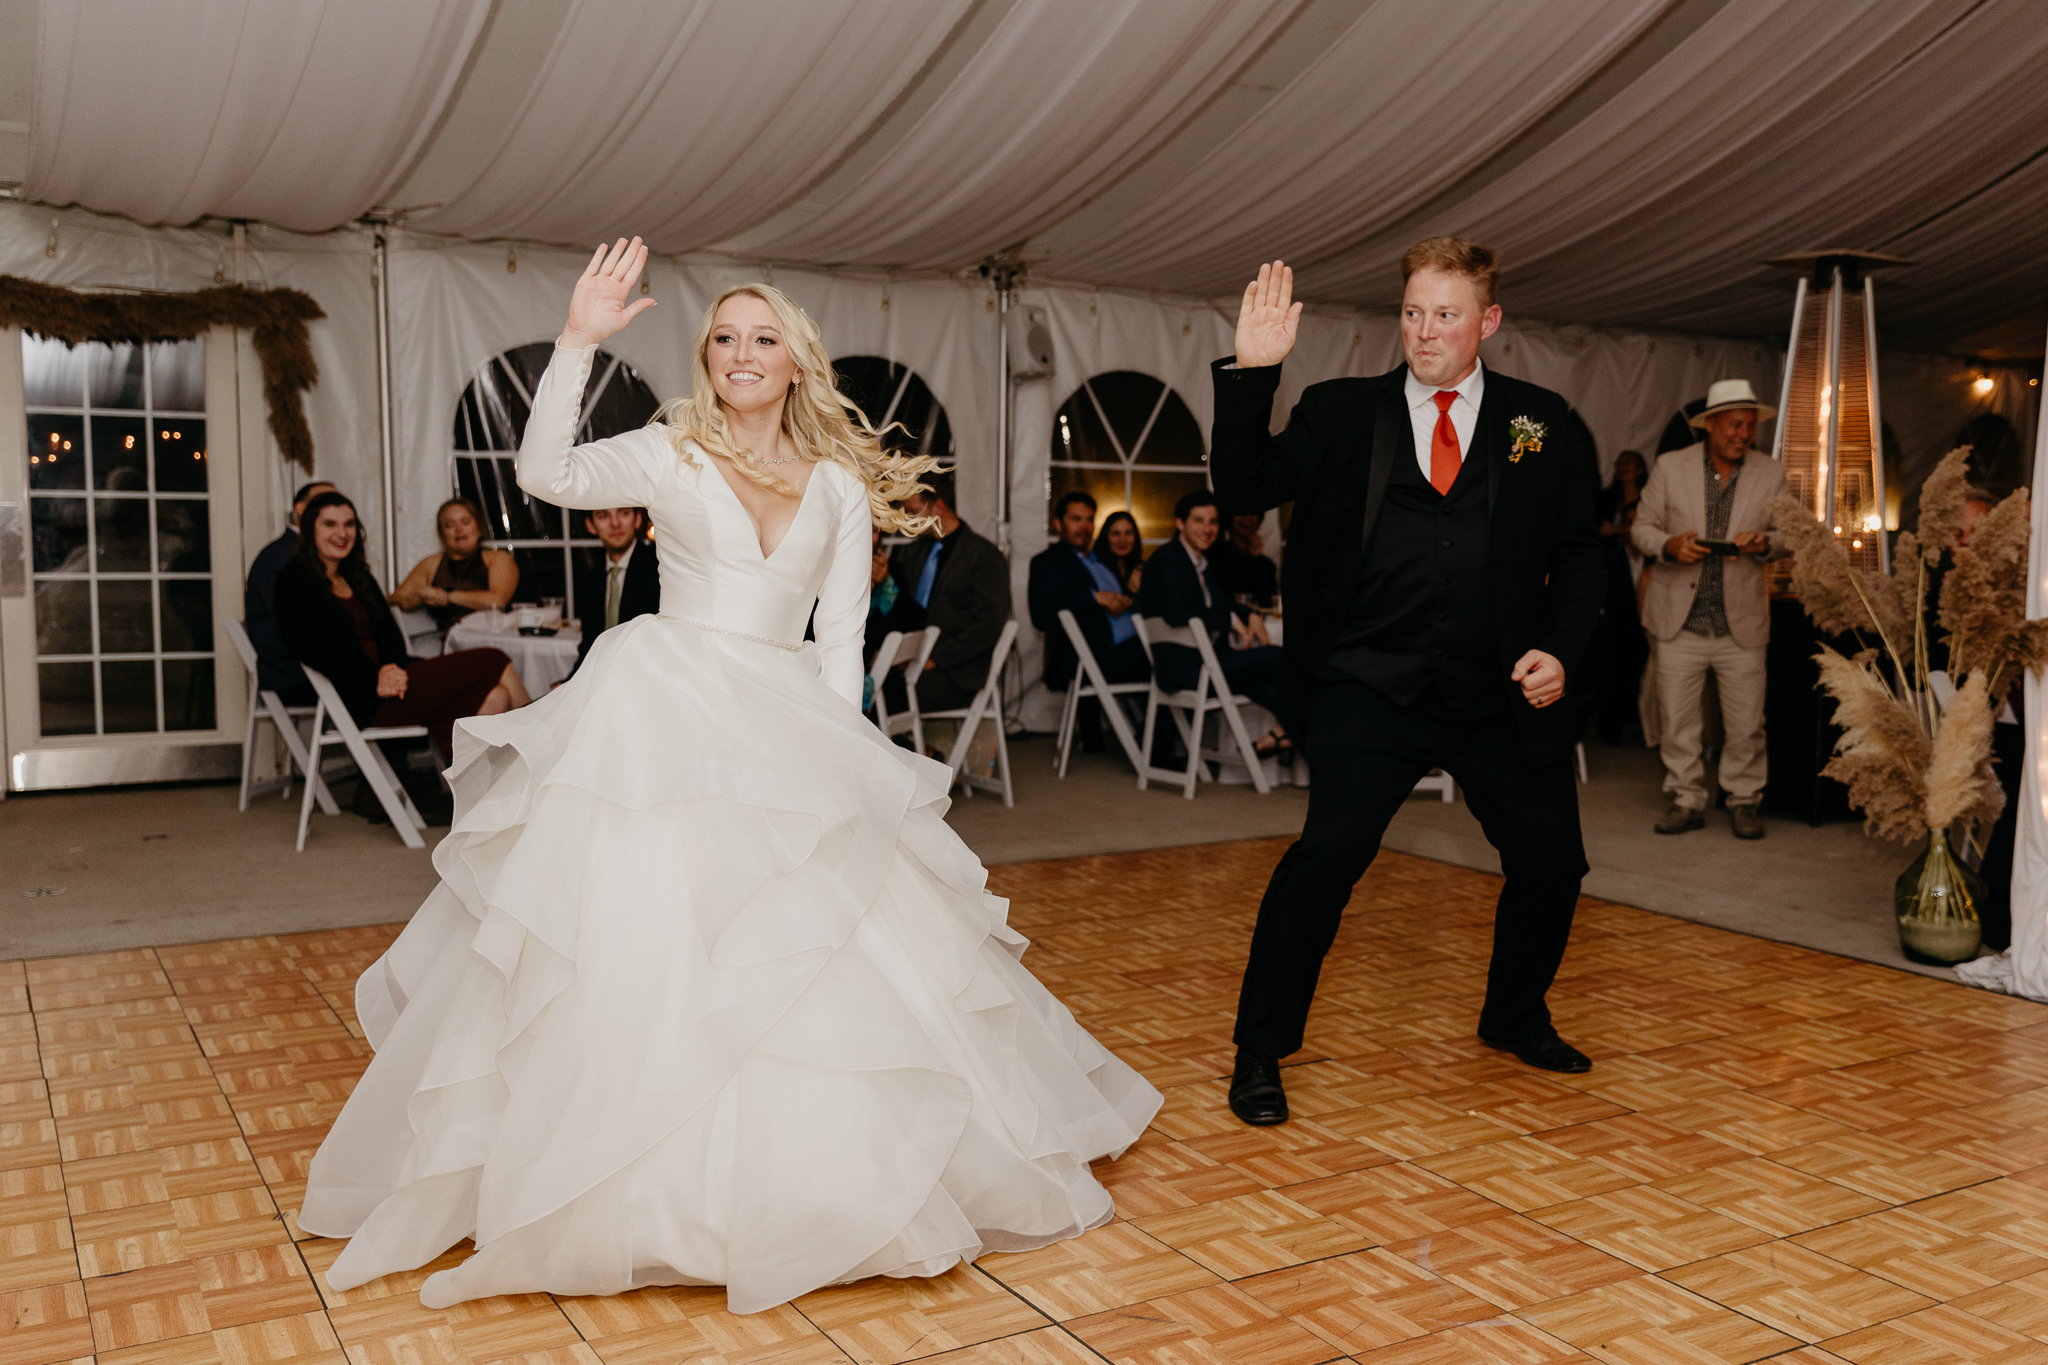 Bride dances with her father on the dancefloor in a white tent wedding